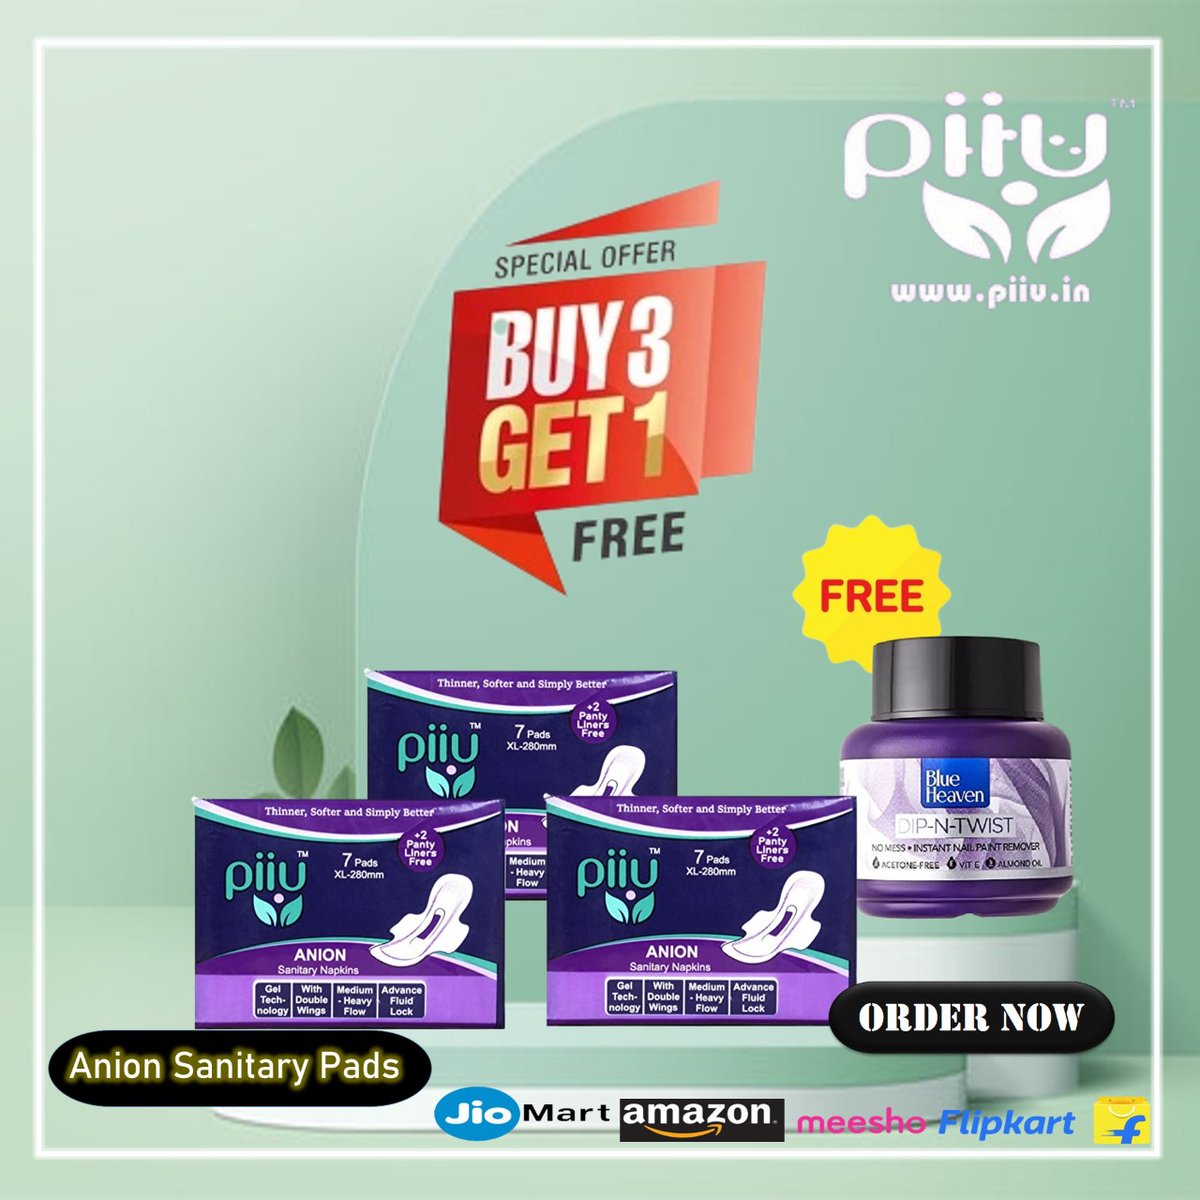 Piiu Anion Sanitary Pads
XL 280mm
Pack of 7pads + 2 panty liners free
MRP Rs.75
Special Offer
Buy 3 packs and Get 1 BlueHeaven Dip N Twist Nail Paint Remover Free
Available online on Amazon, Meesho, Glowroad, etc.
Connect on WhatsApp: +91-9971227347
#piiu #anionpads #meesho #girl